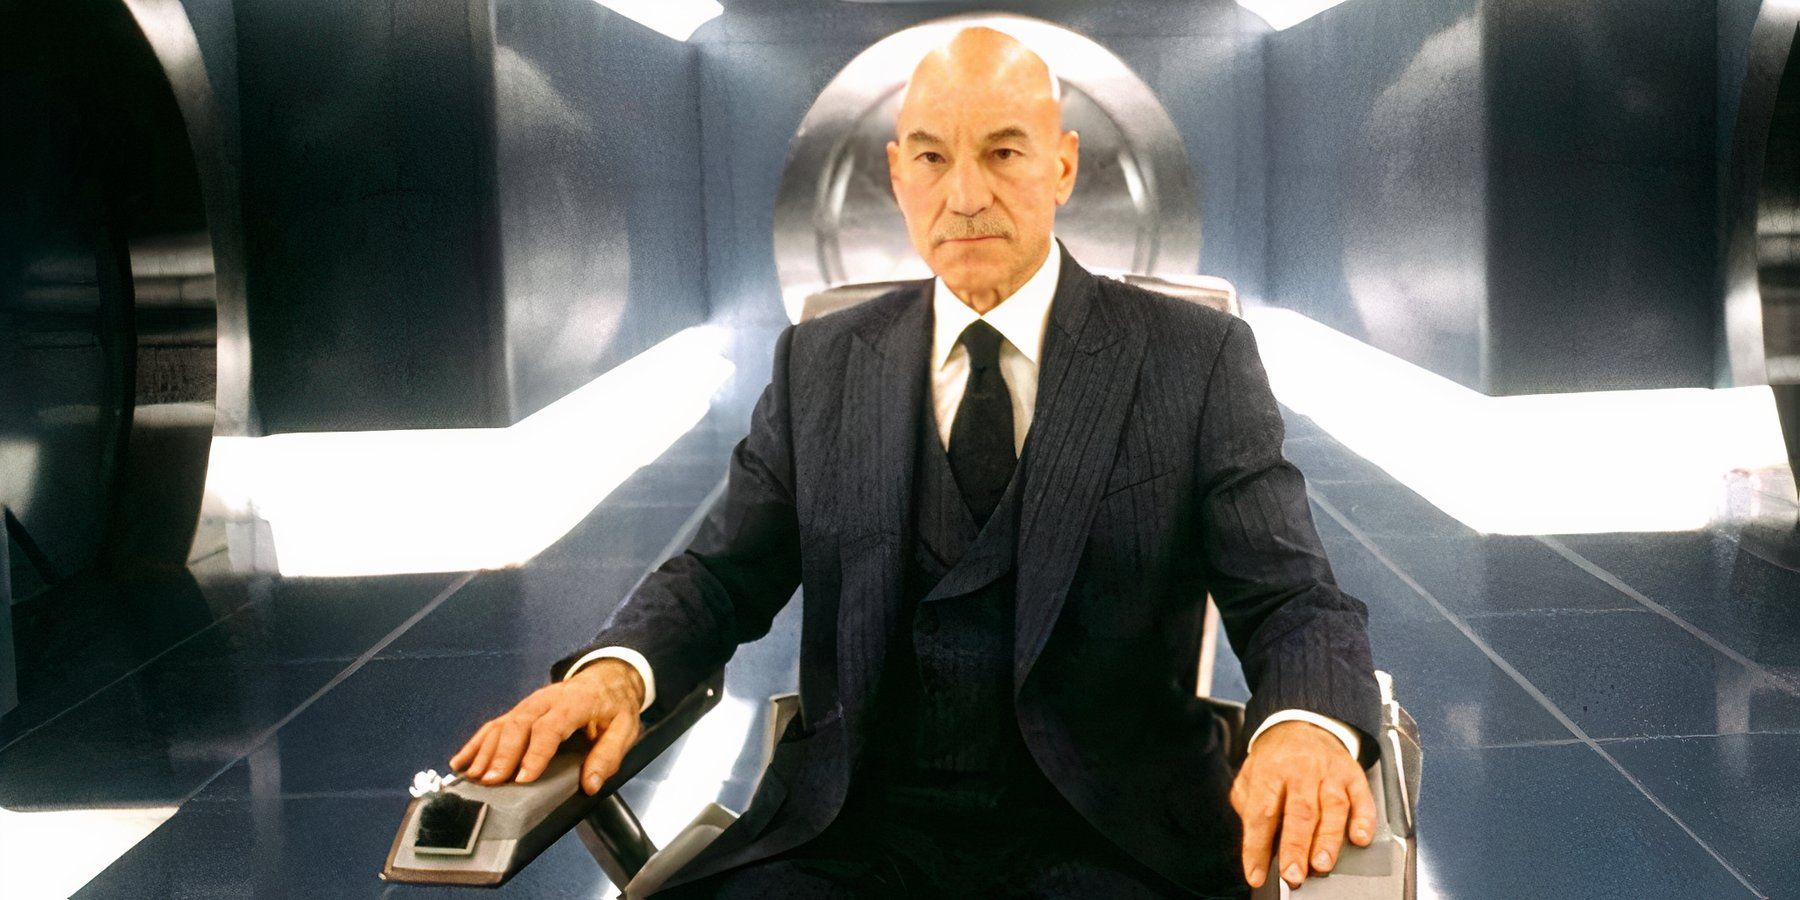 Professor X sits in his motorized wheelchair in the halls of X-Mansion in 2000’s X-Men.